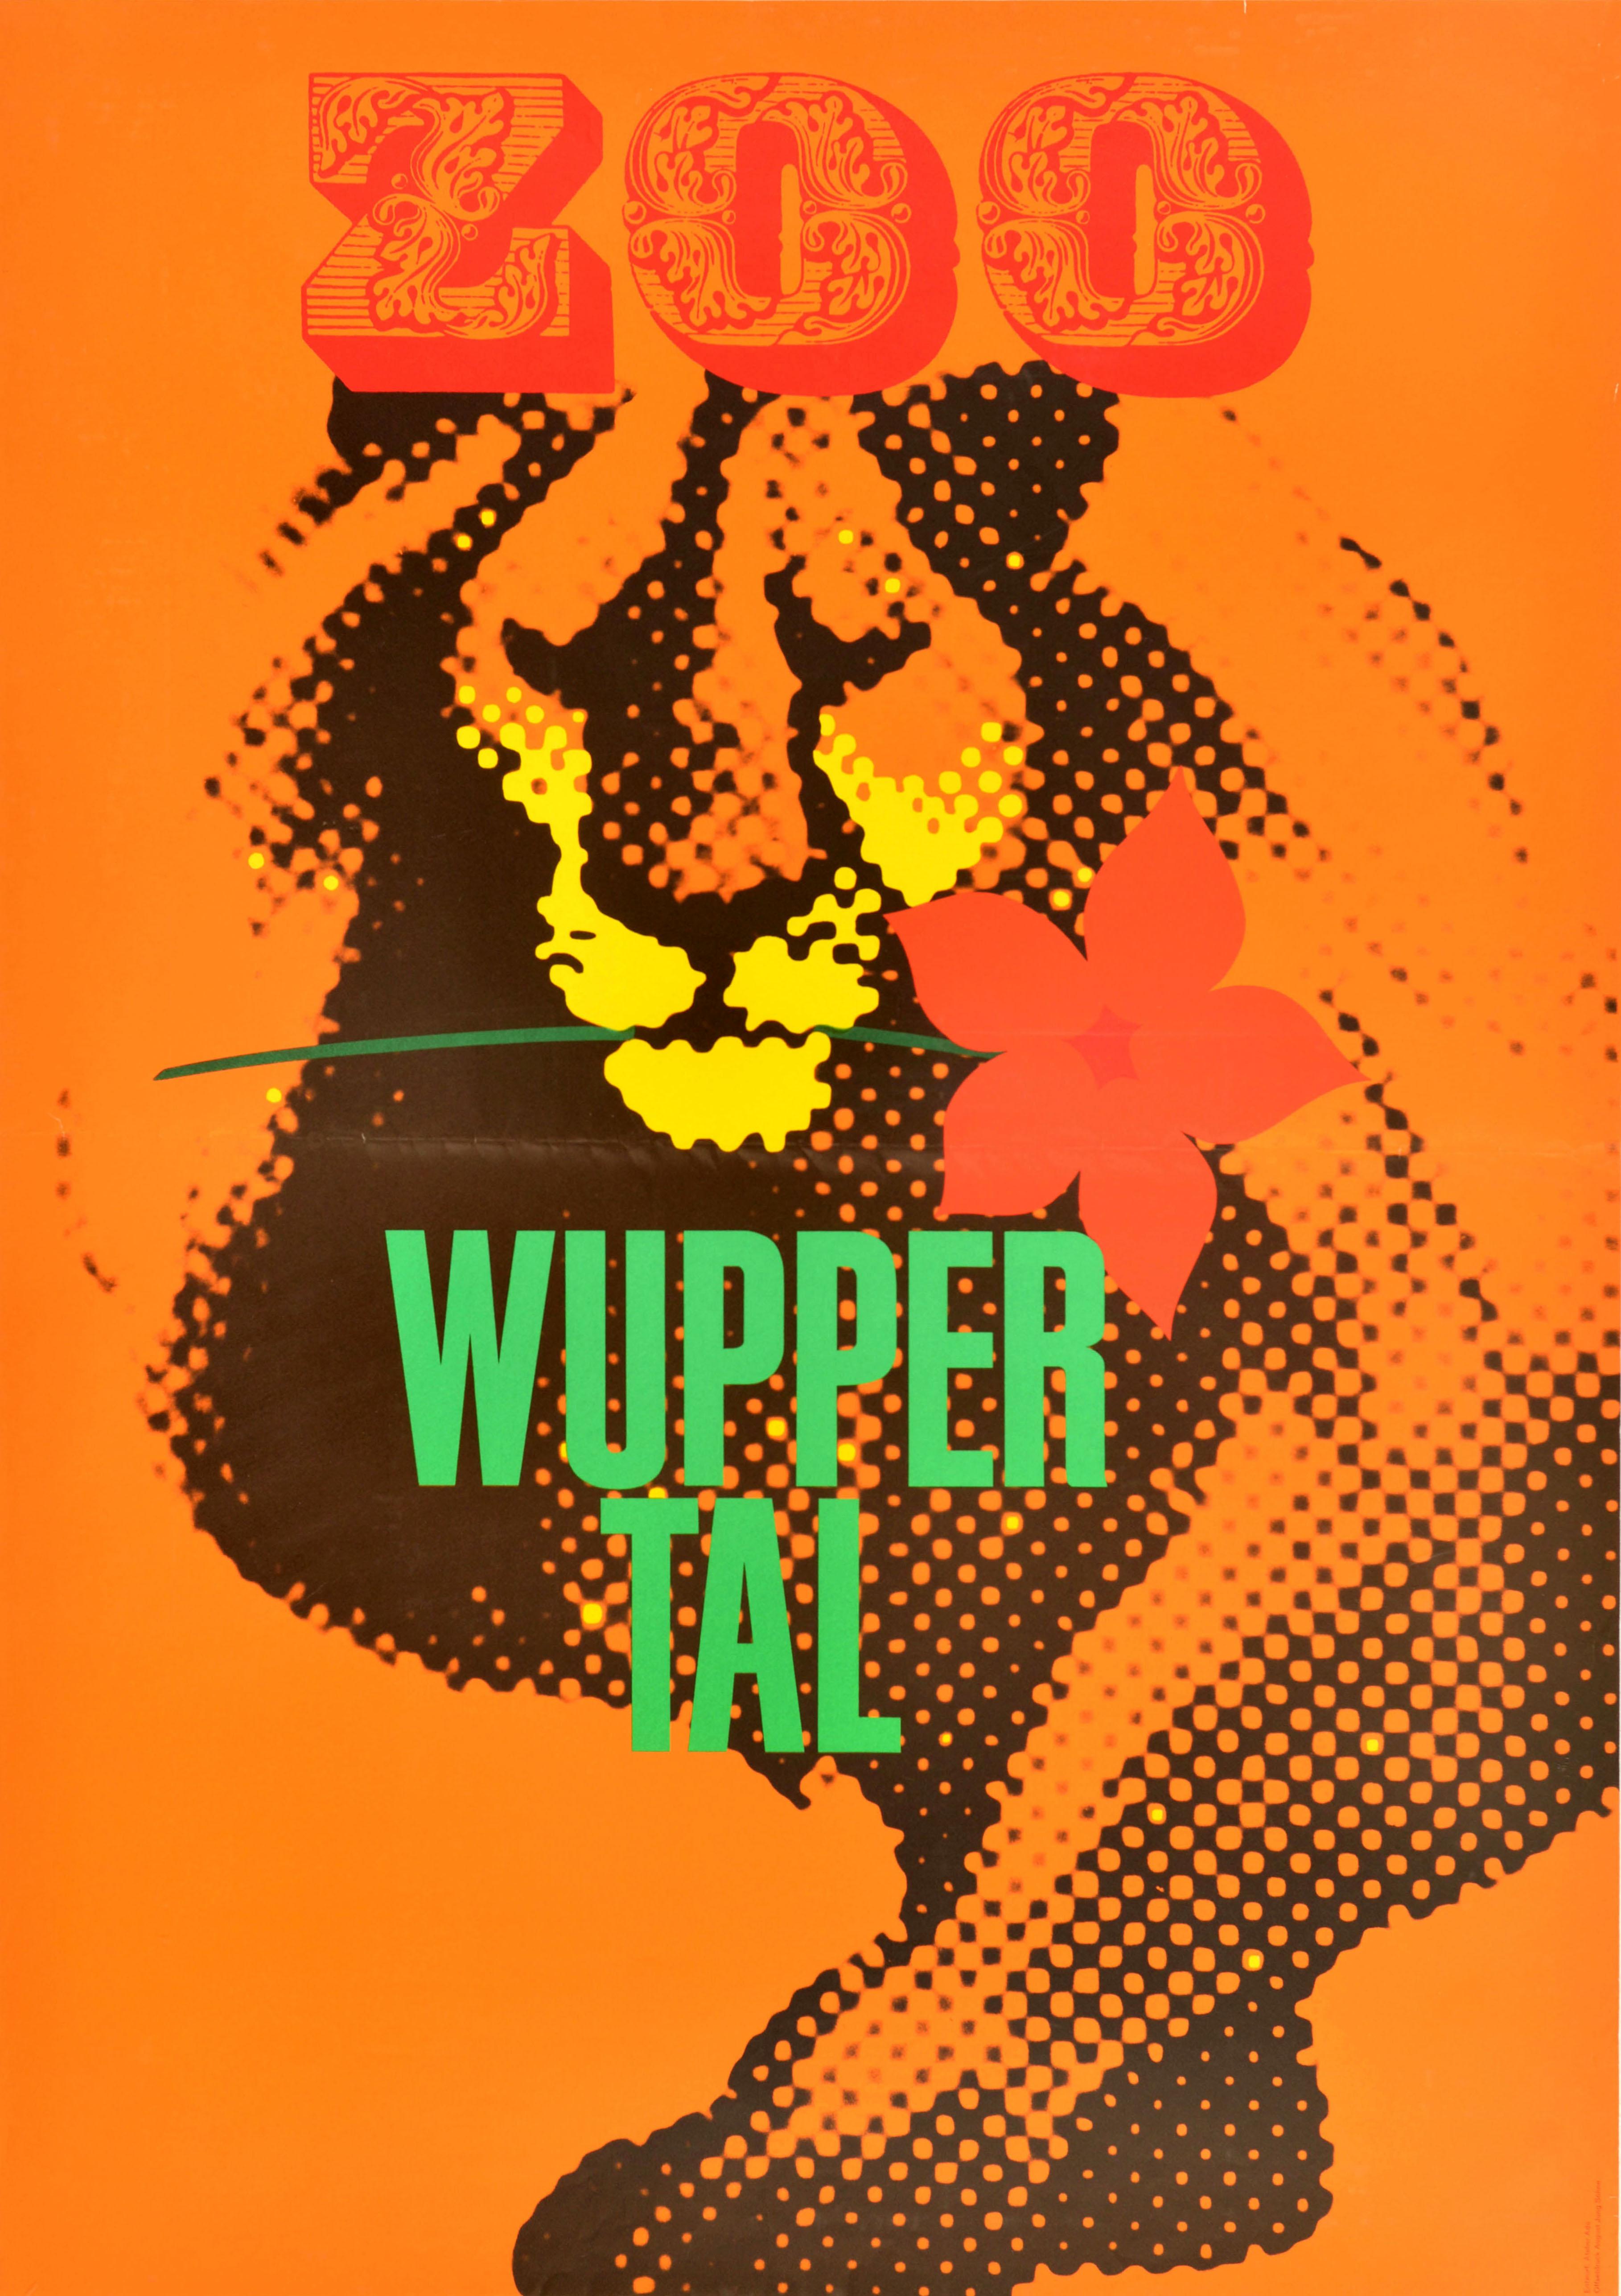 Unknown Print - Original Vintage Advertising Poster Wuppertal Zoo Lion Germany Design Art